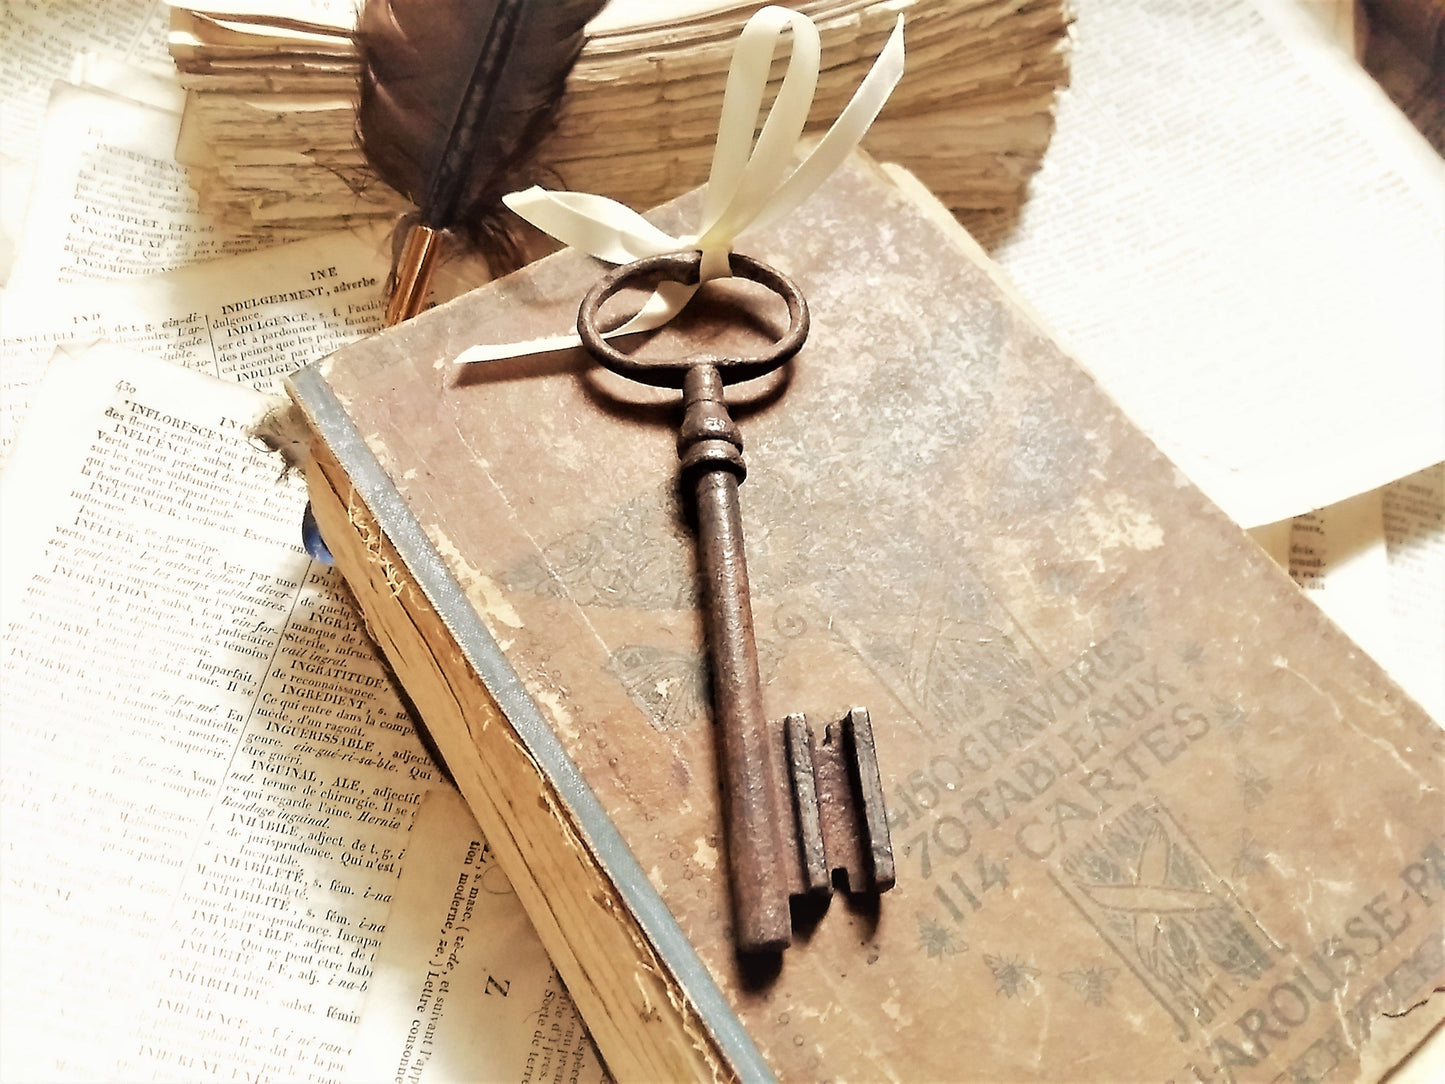 Large 5"/13cms Iron Key. Antique Skeleton Key. Hand Forged Iron Key. from Tiggy & Pip - €28.00! Shop now at Tiggy and Pip